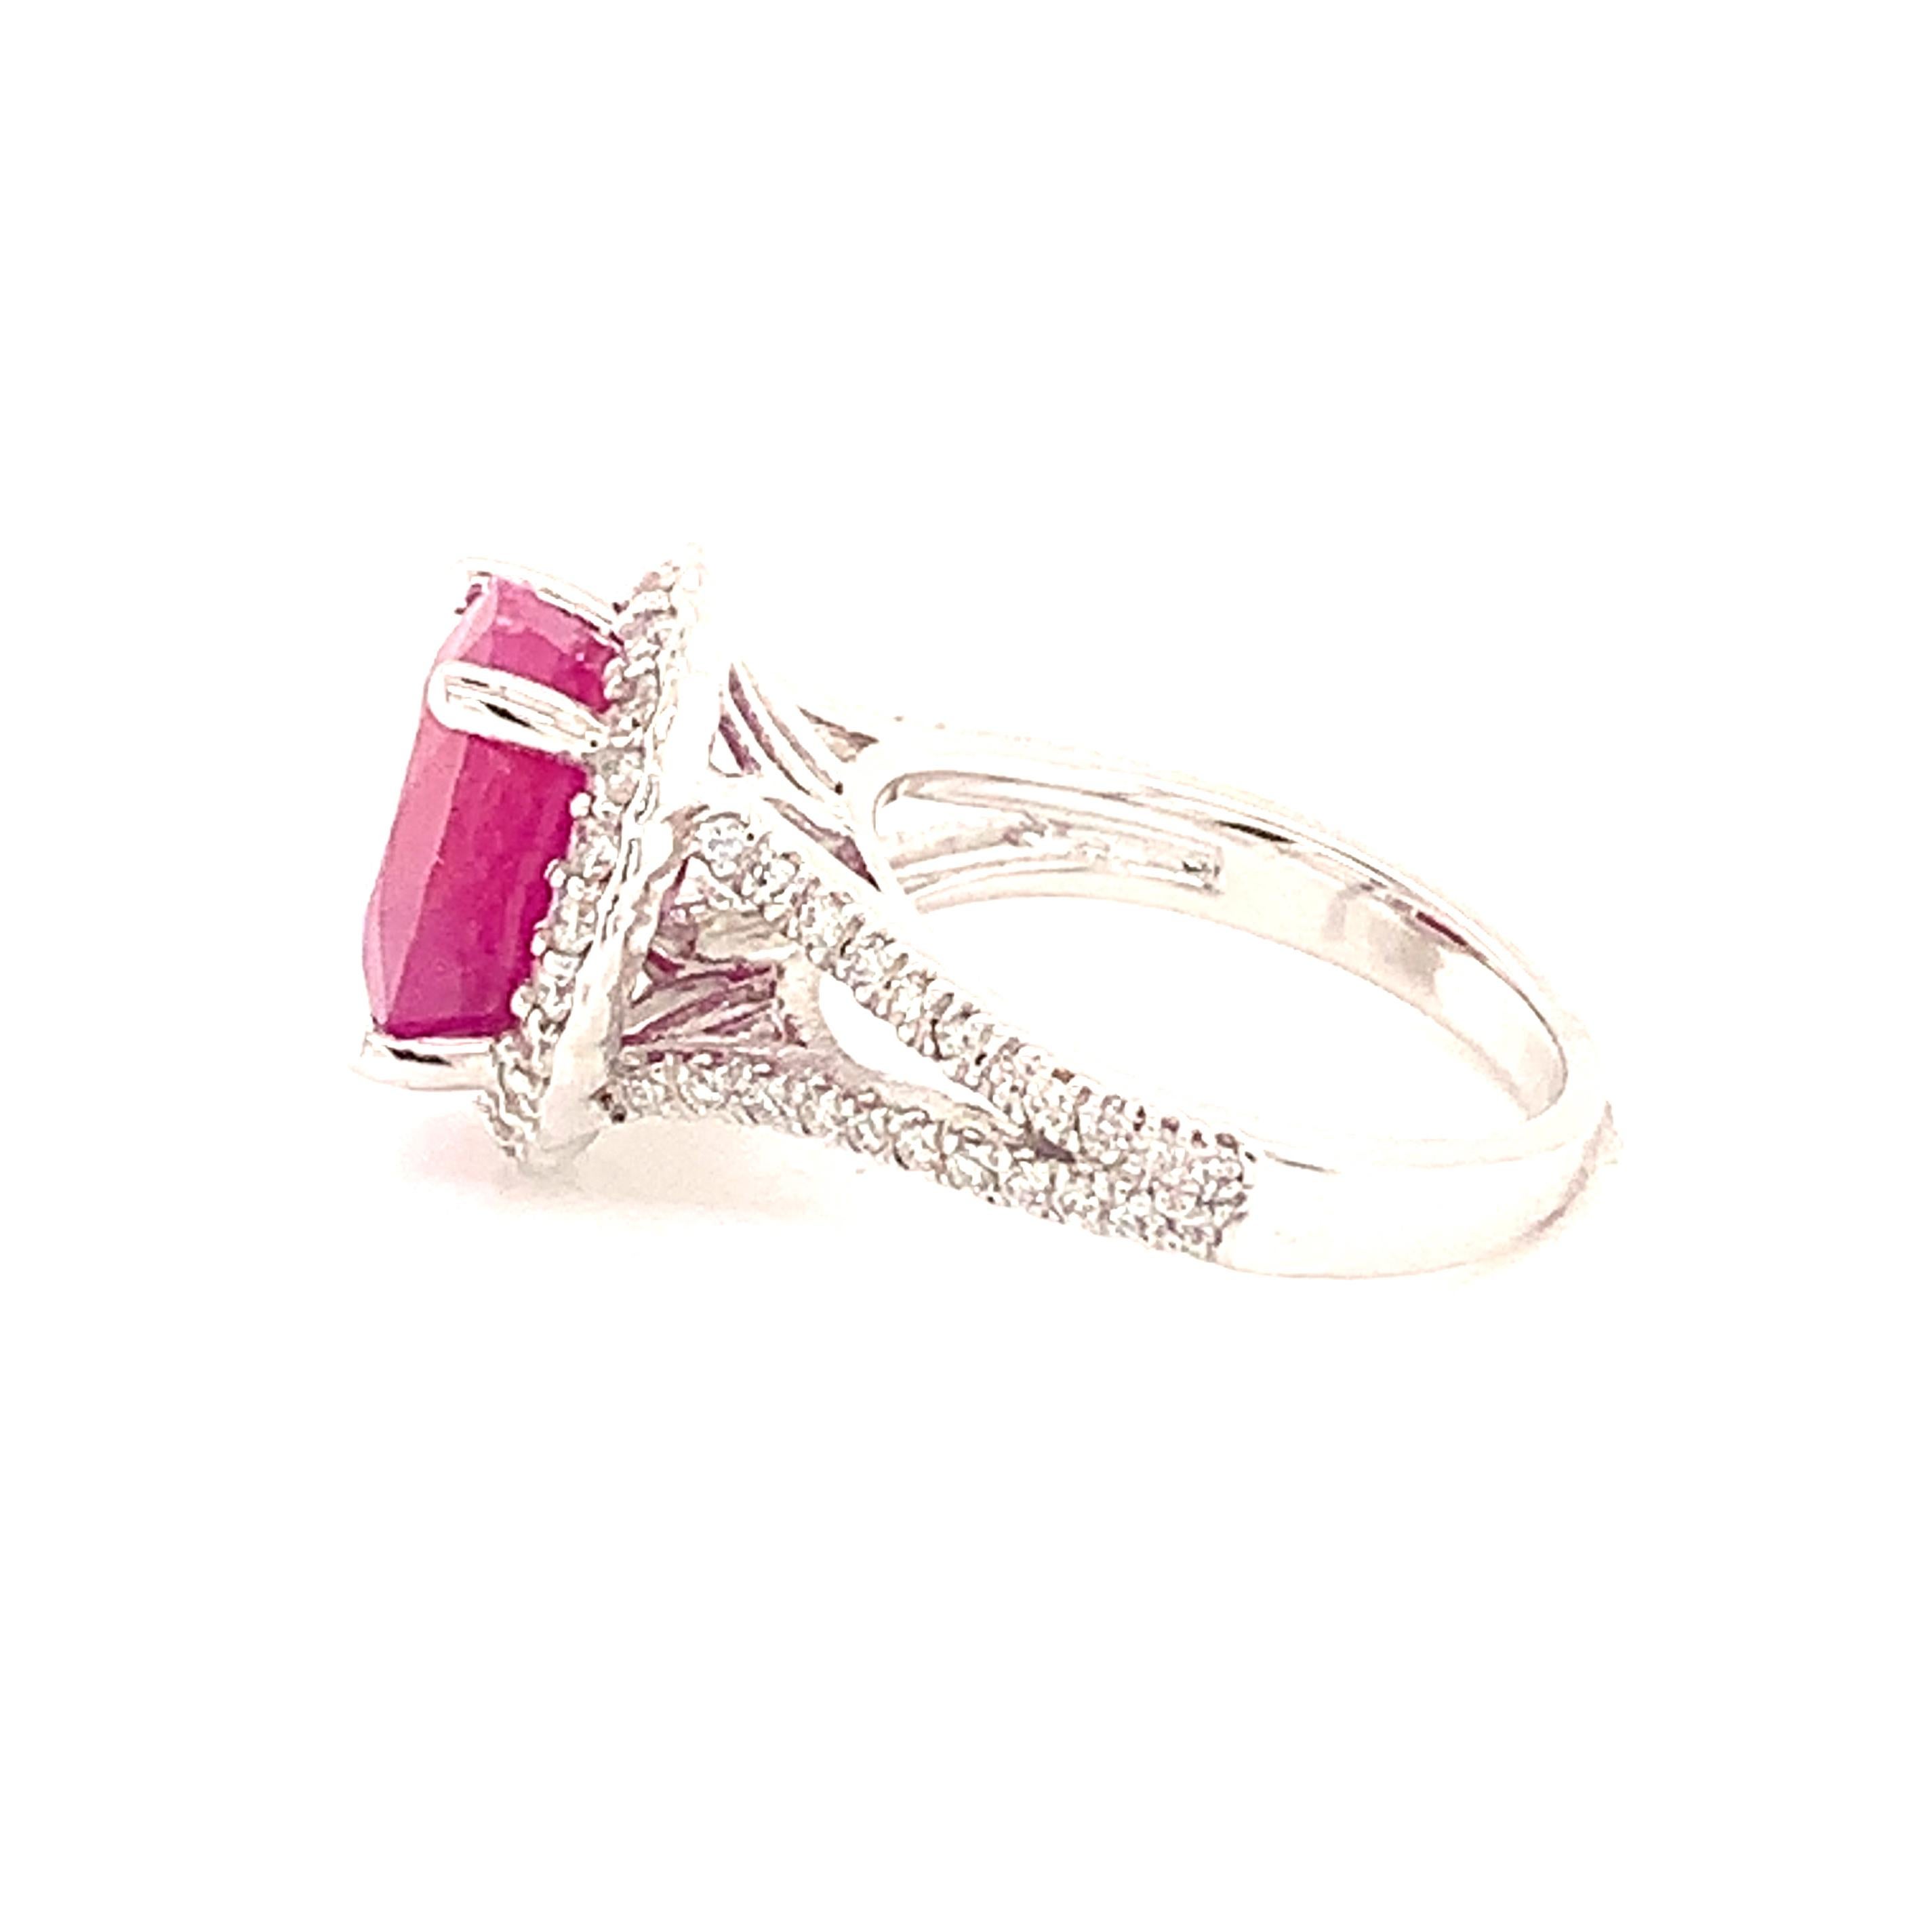 Natural Ruby Diamond Ring 14k Gold 6.5 TCW GIA Certified For Sale 2